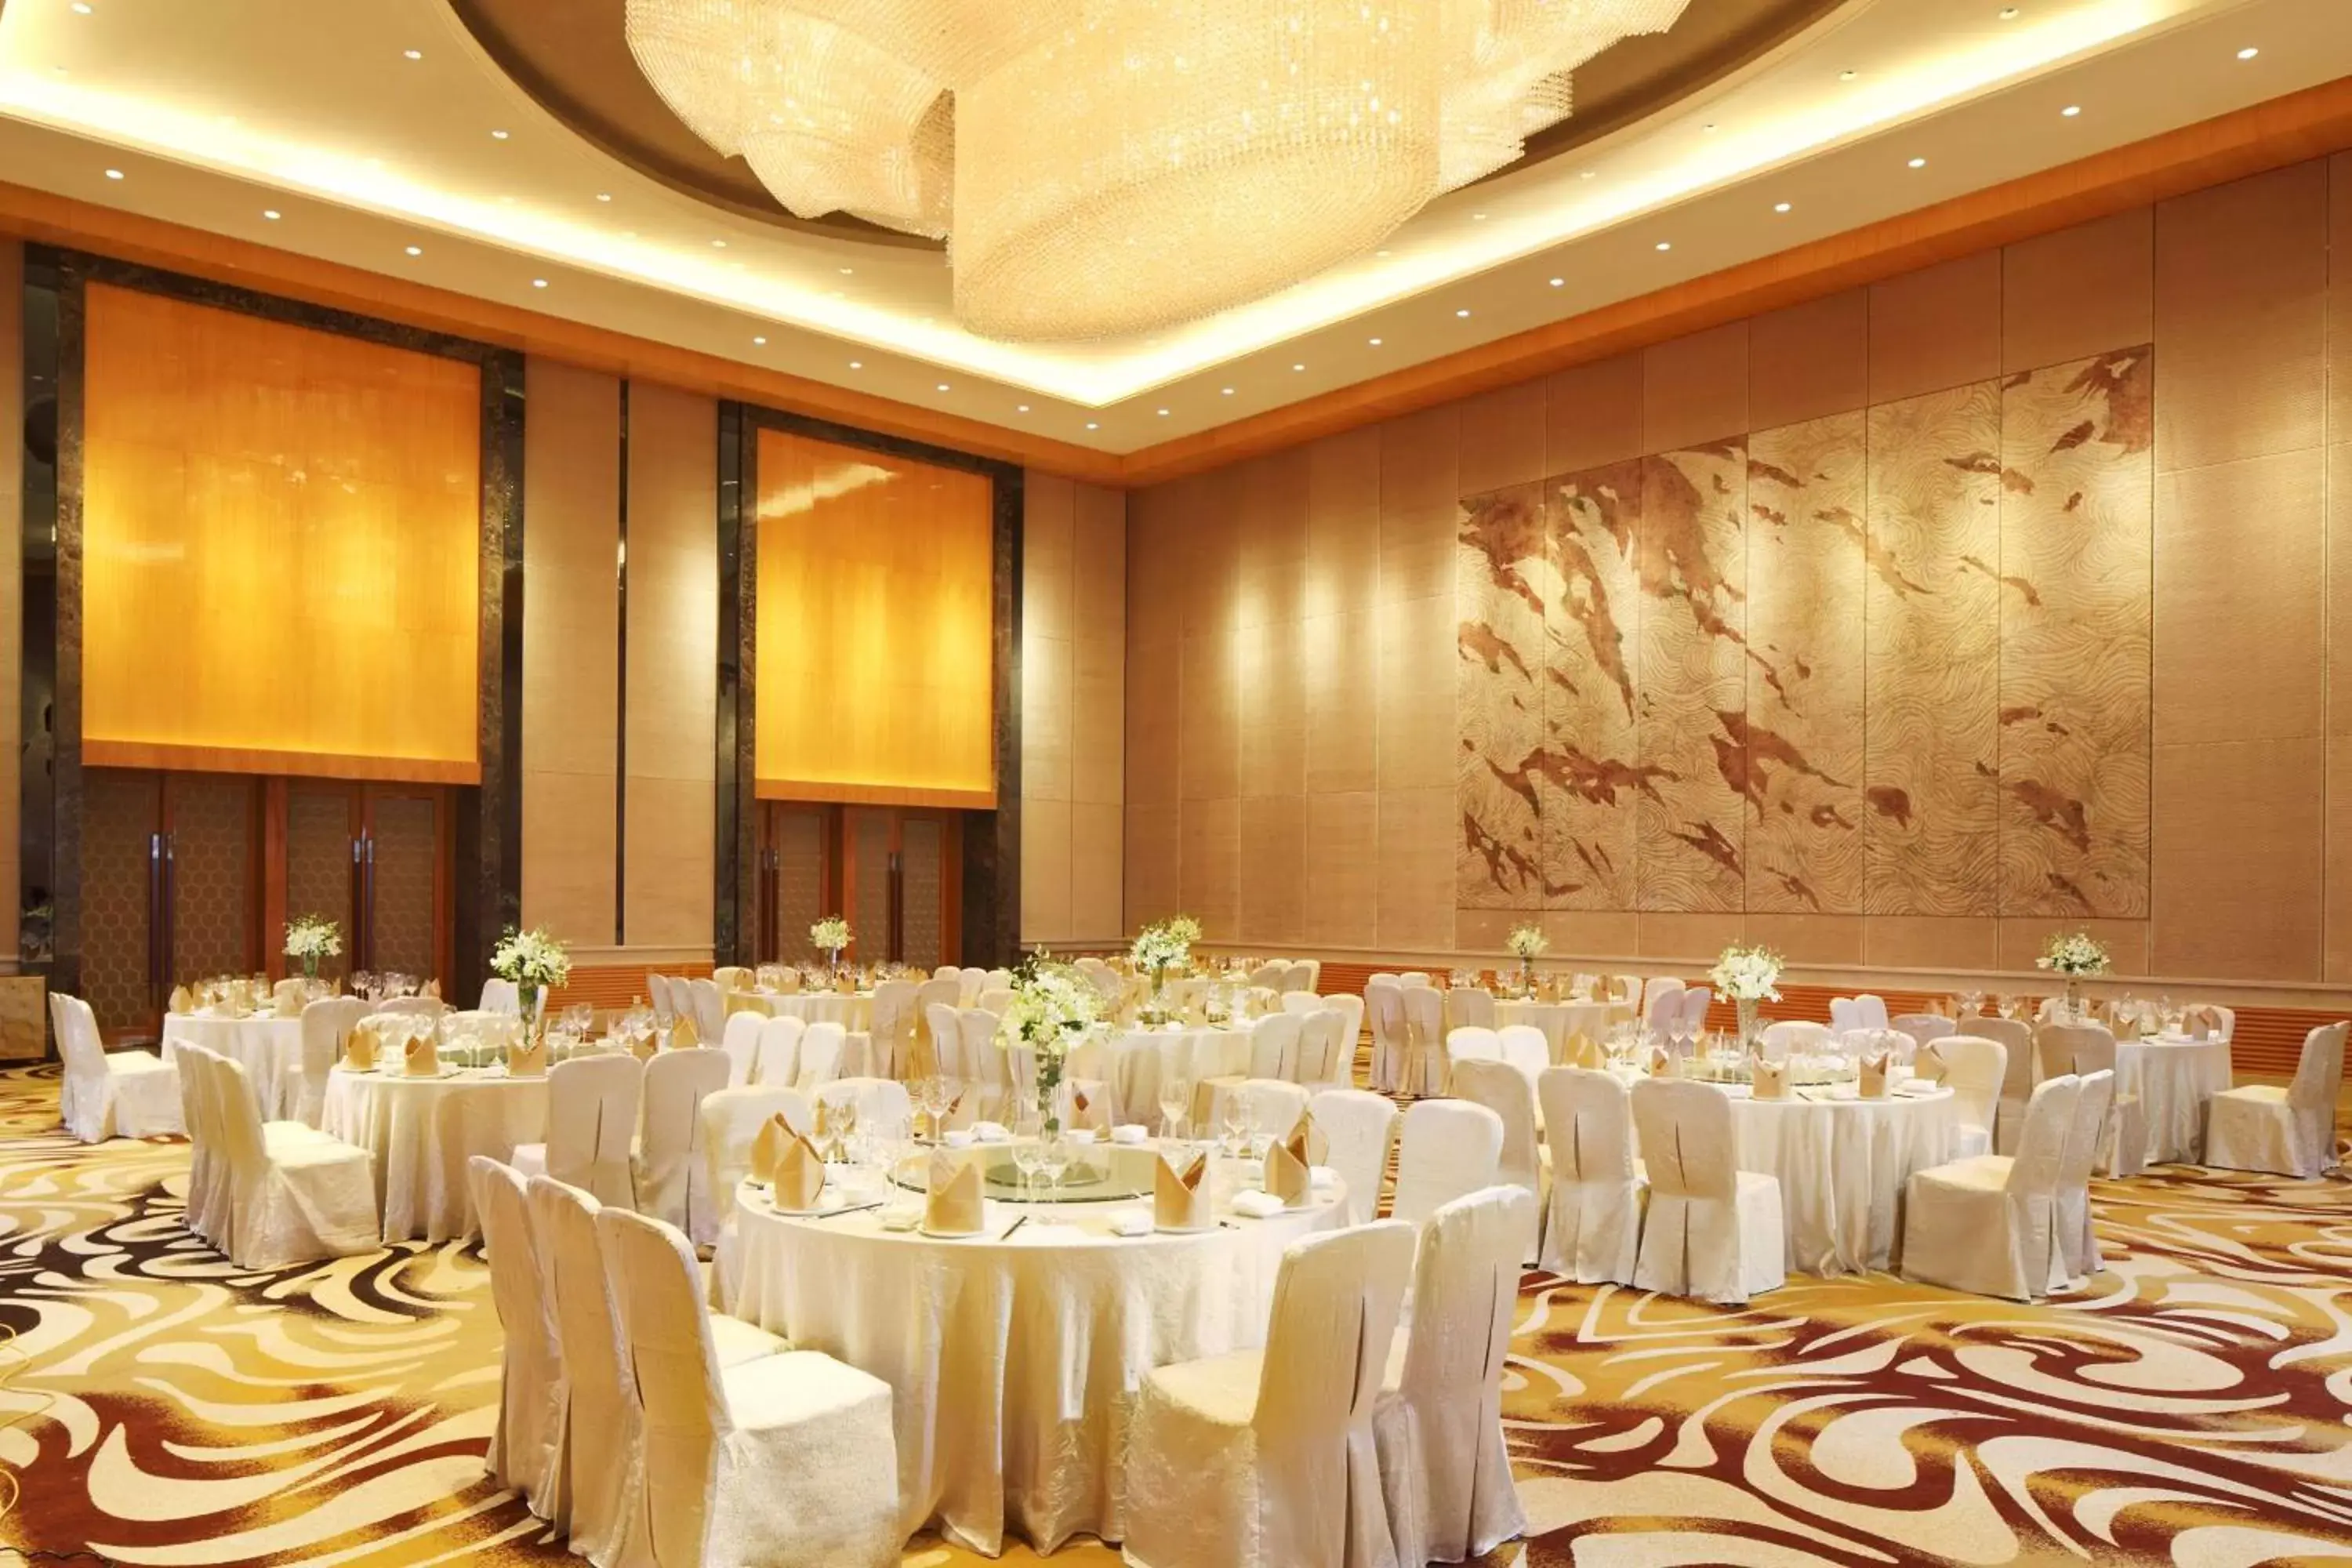 Meeting/conference room, Banquet Facilities in DoubleTree by Hilton Hangzhou East